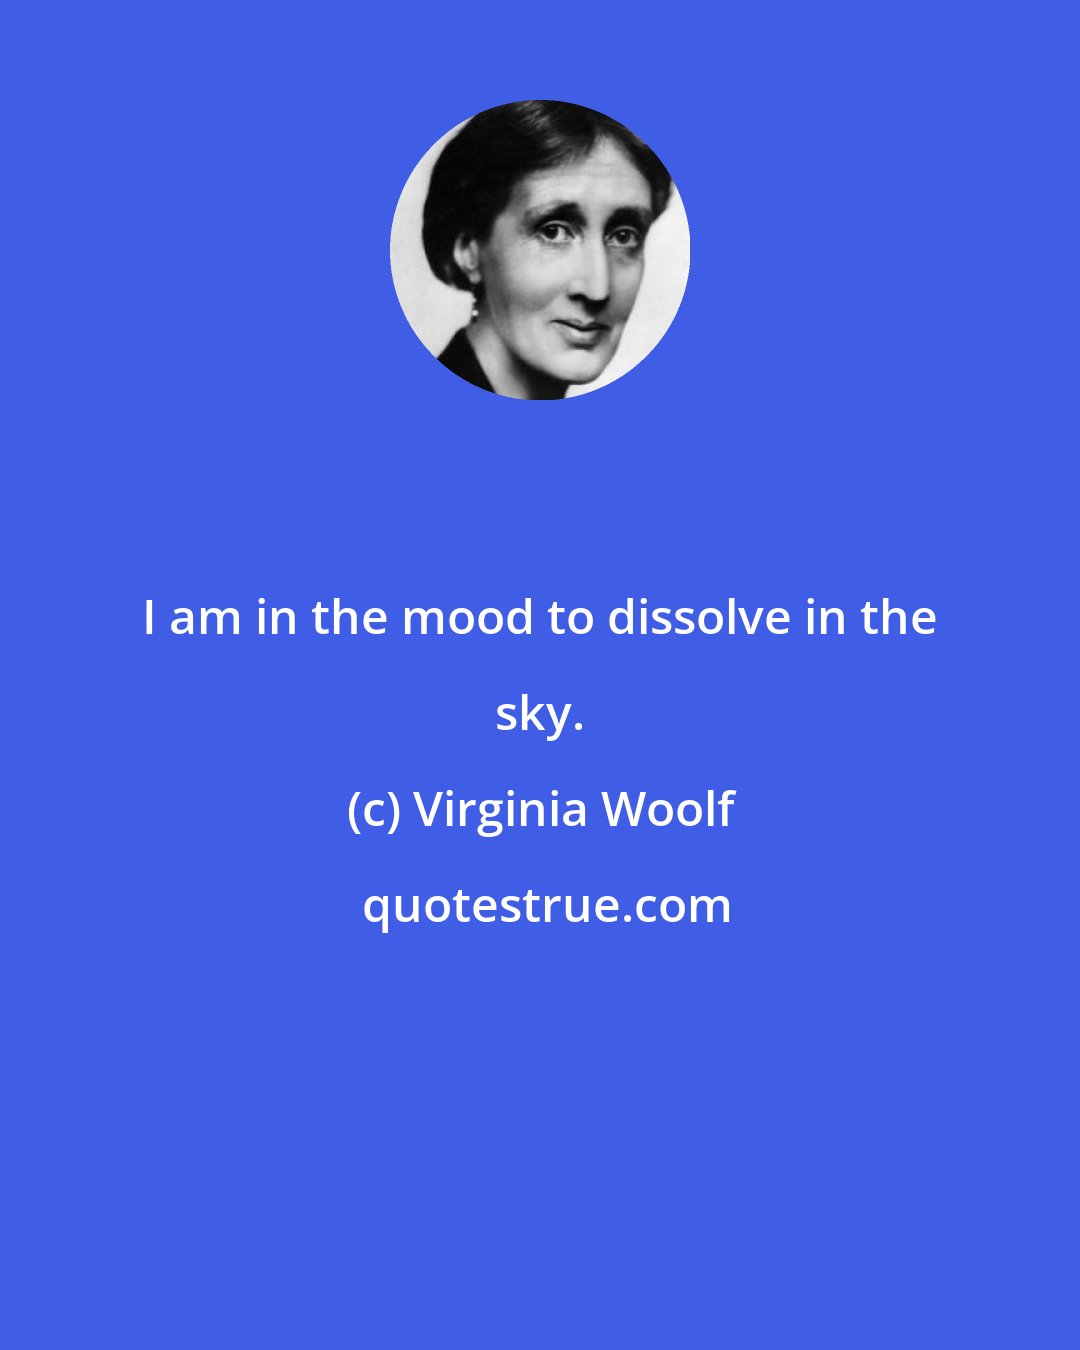 Virginia Woolf: I am in the mood to dissolve in the sky.